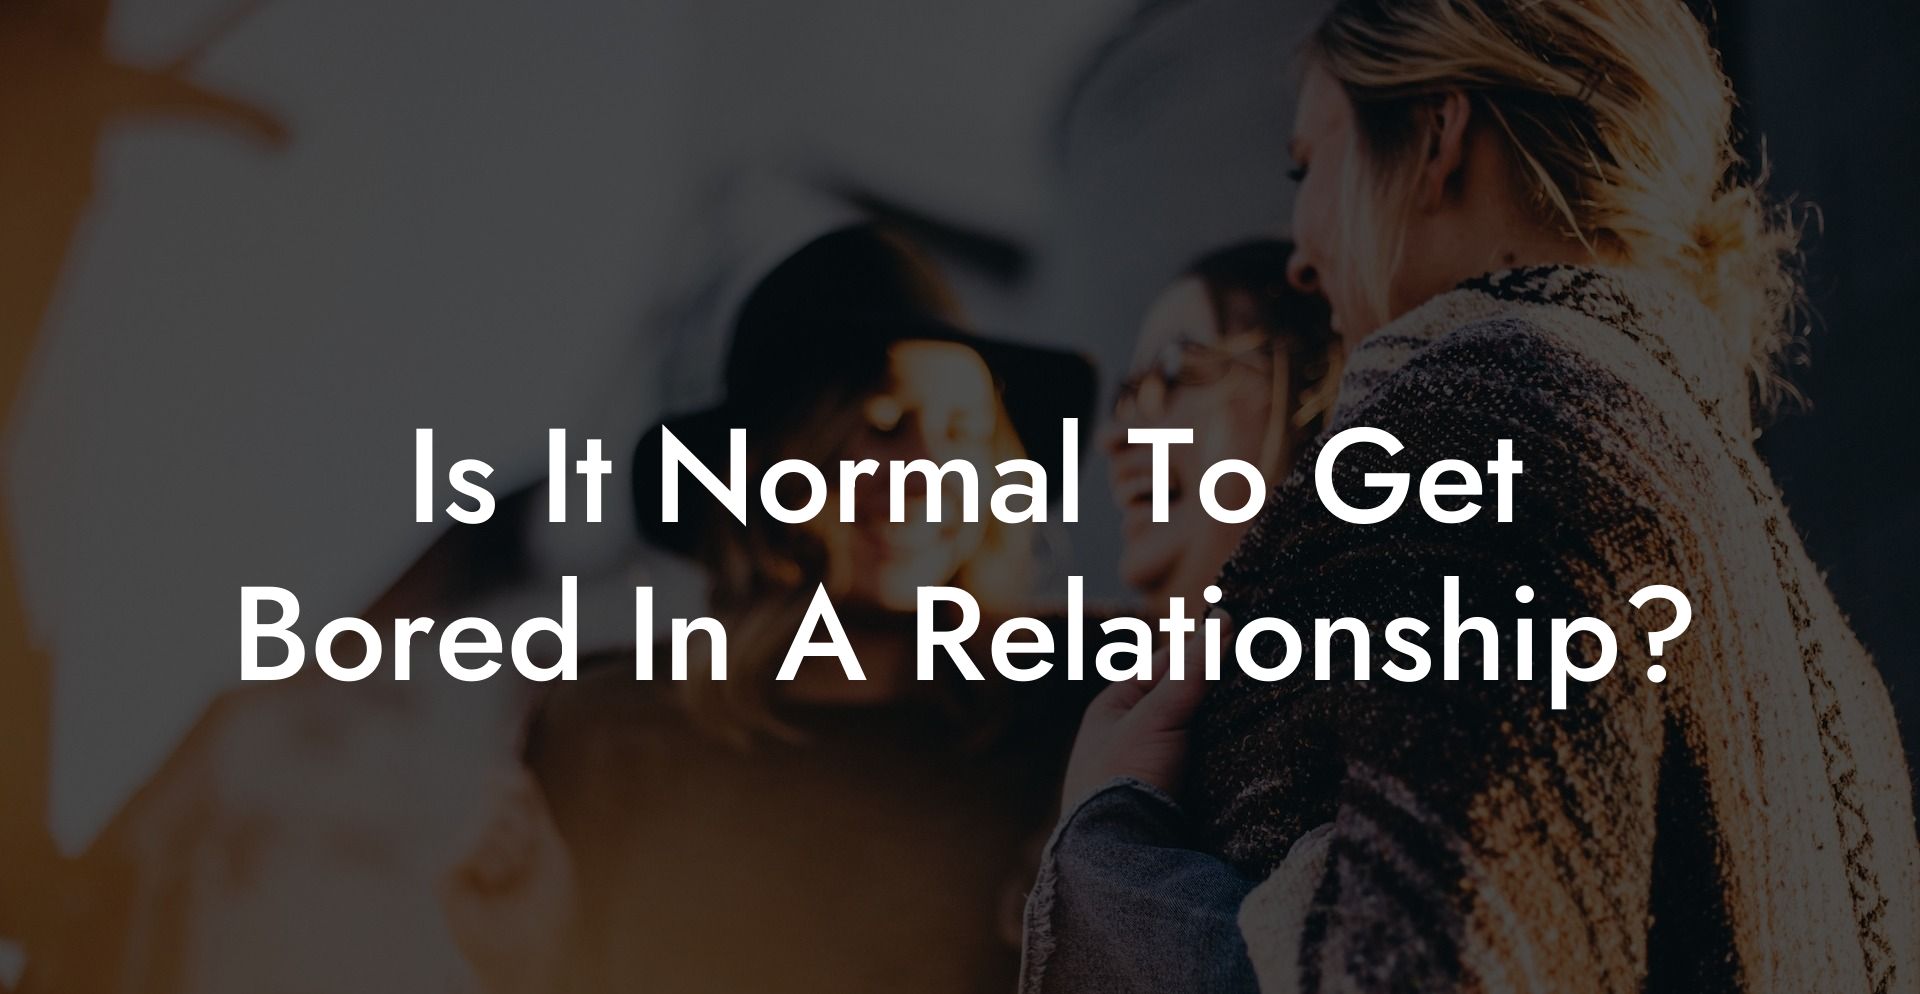 Is It Normal To Get Bored In A Relationship?